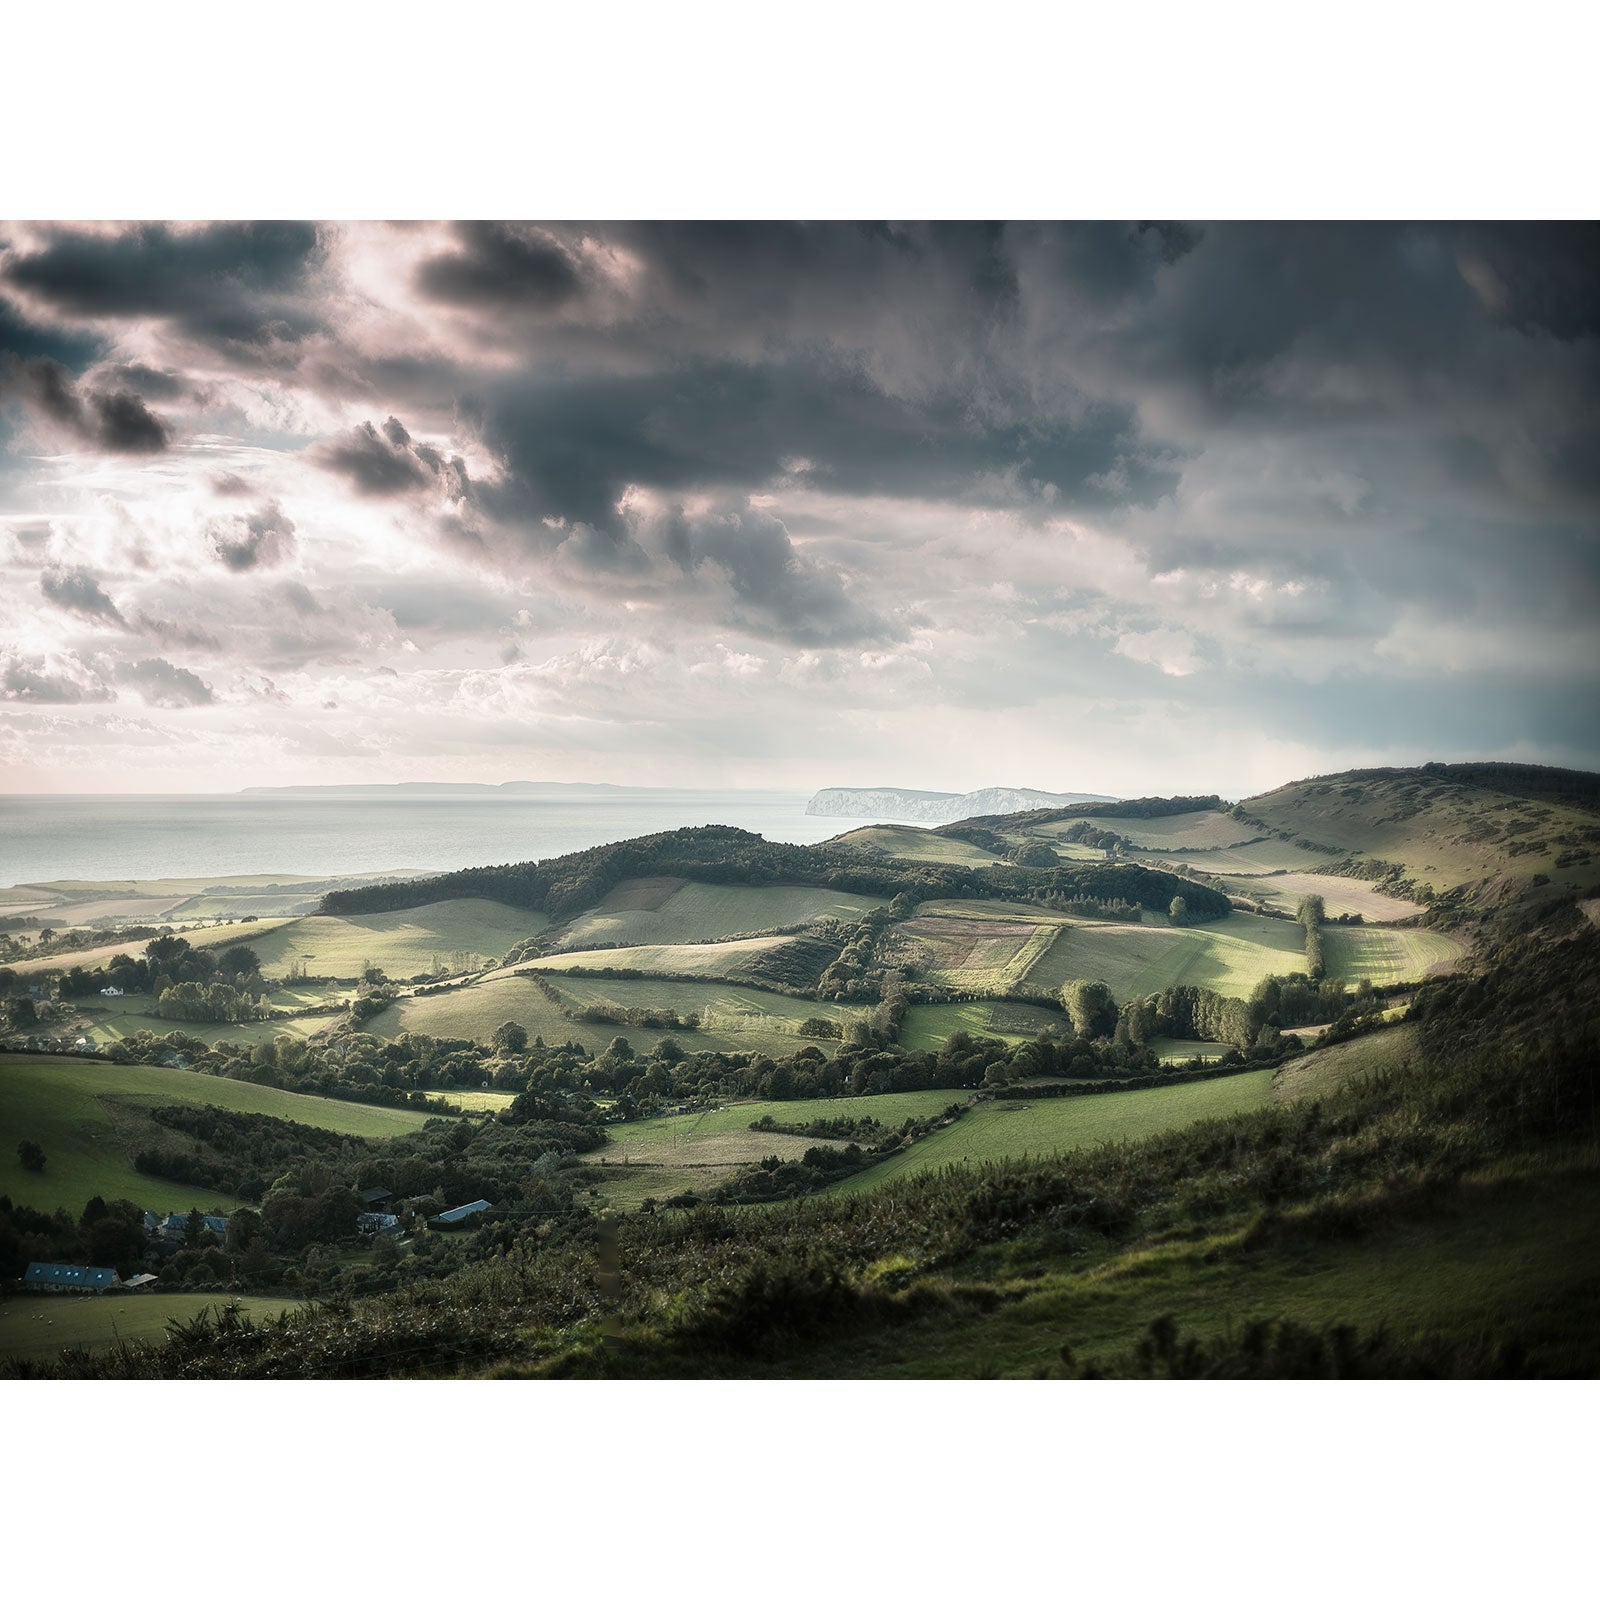 Rolling hills under a dramatic sky with sunlight piercing through the clouds on the Isle of Gascoigne - View over Brighstone by Available Light Photography.